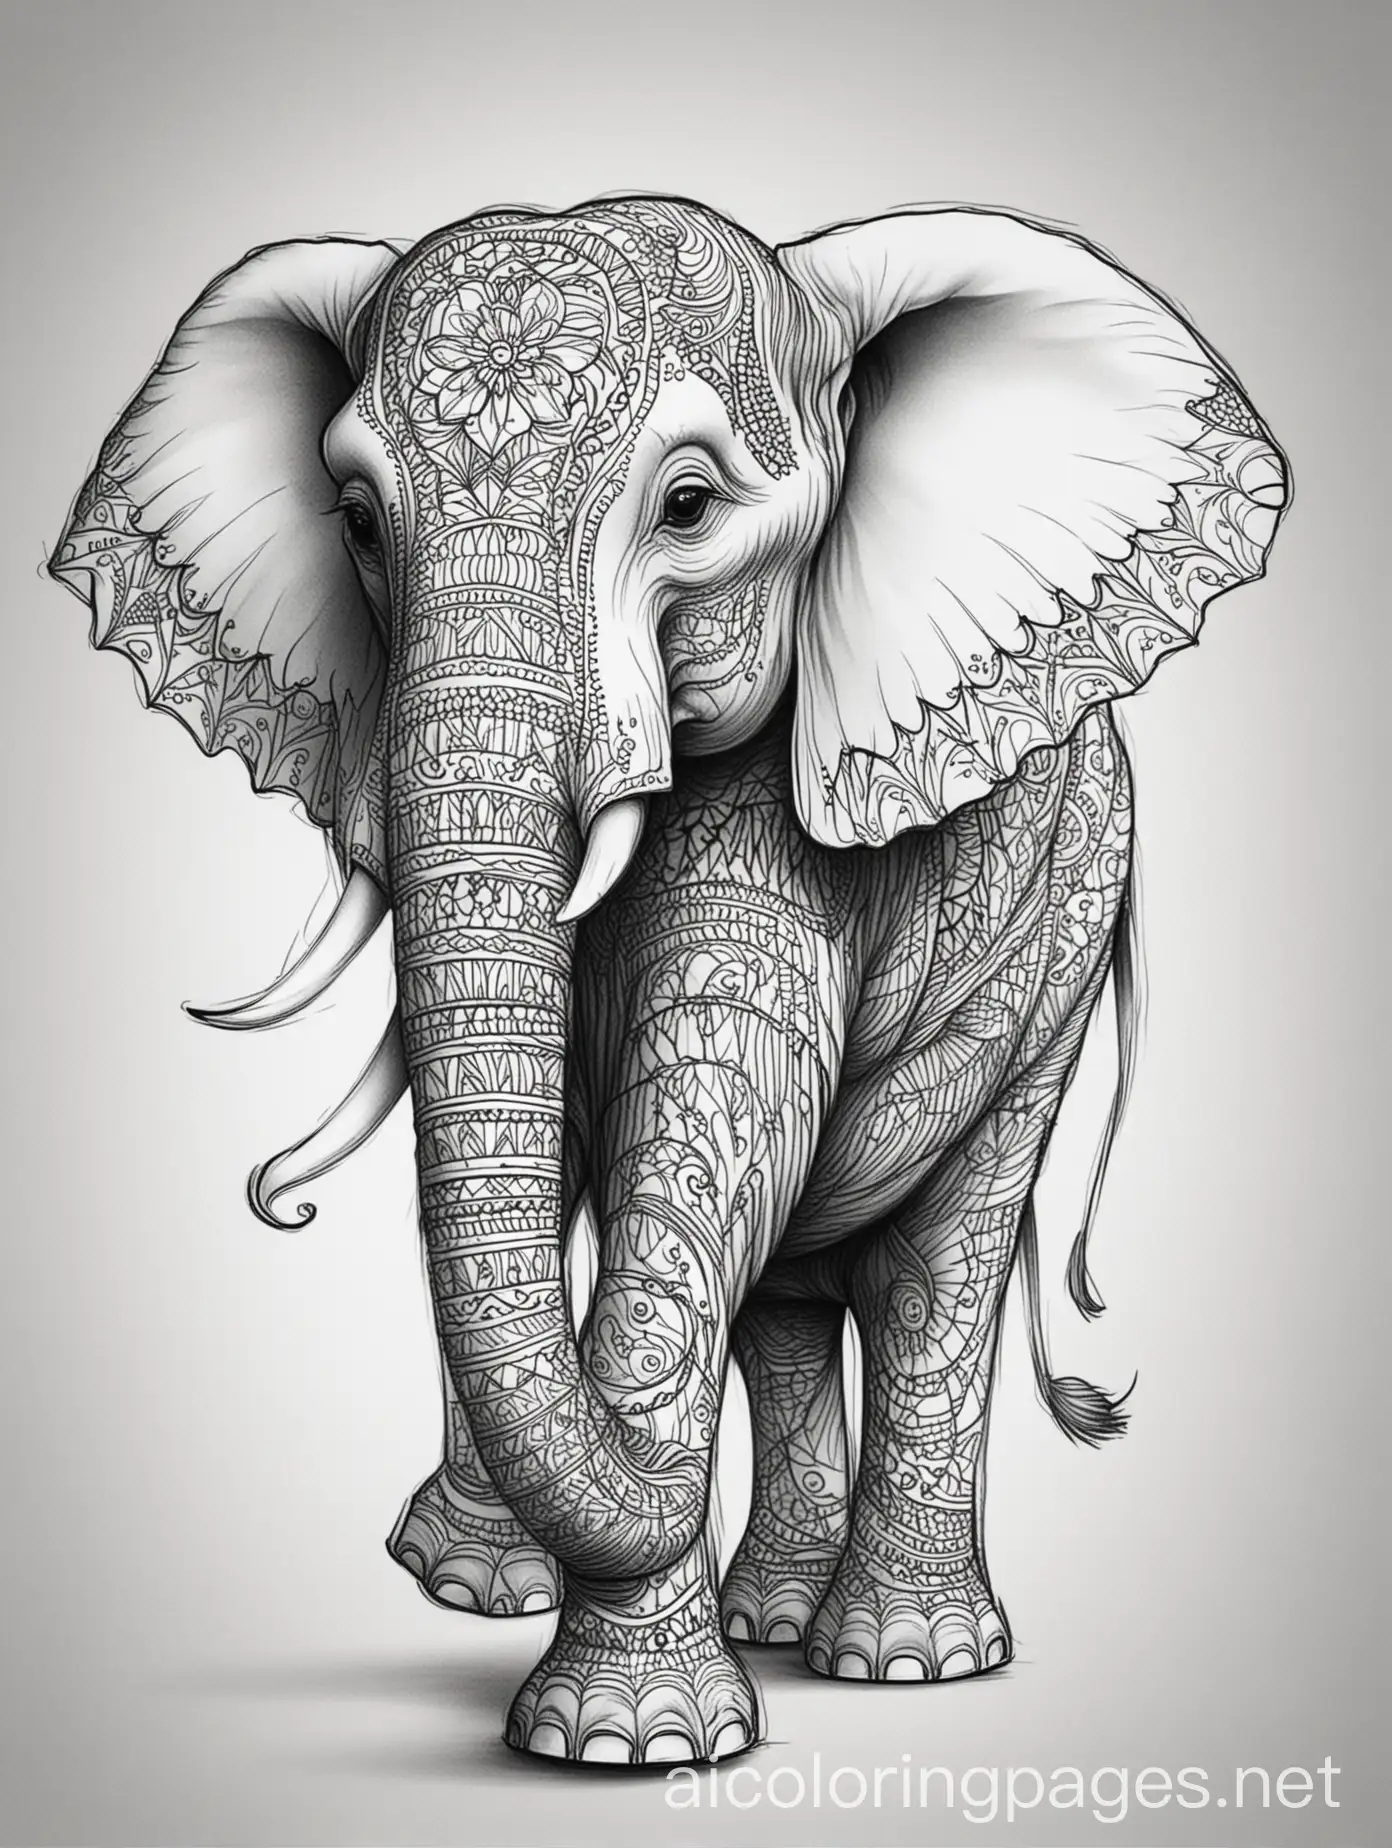 Create a stunning, intricate, black and white design of a beautiful and elegant elephant for a tattoo. , Coloring Page, black and white, line art, white background, Simplicity, Ample White Space. The background of the coloring page is plain white to make it easy for young children to color within the lines. The outlines of all the subjects are easy to distinguish, making it simple for kids to color without too much difficulty